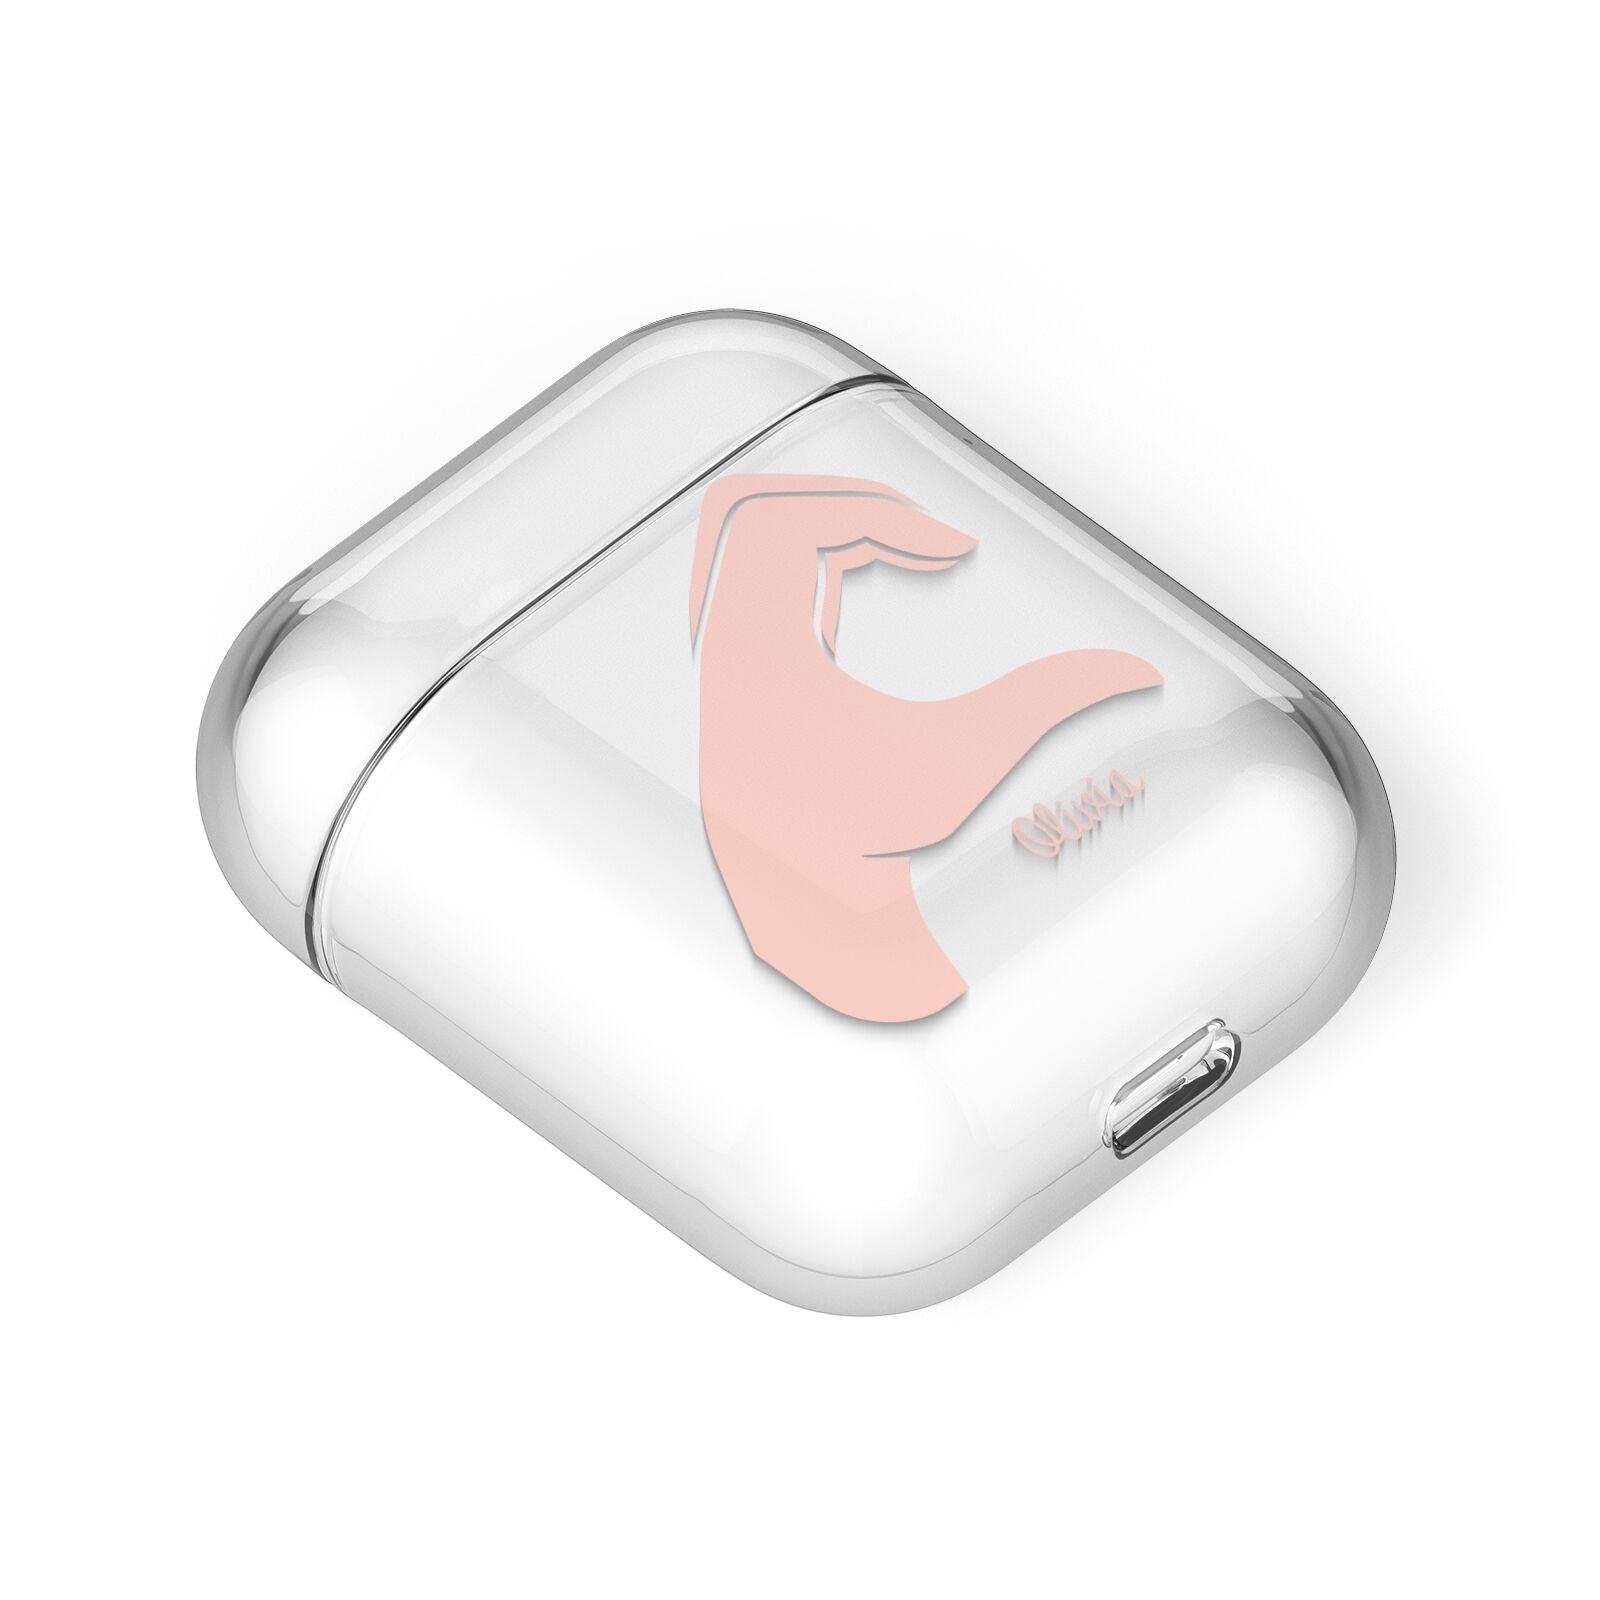 Left Hand in Half Heart with Name AirPods Case Laid Flat